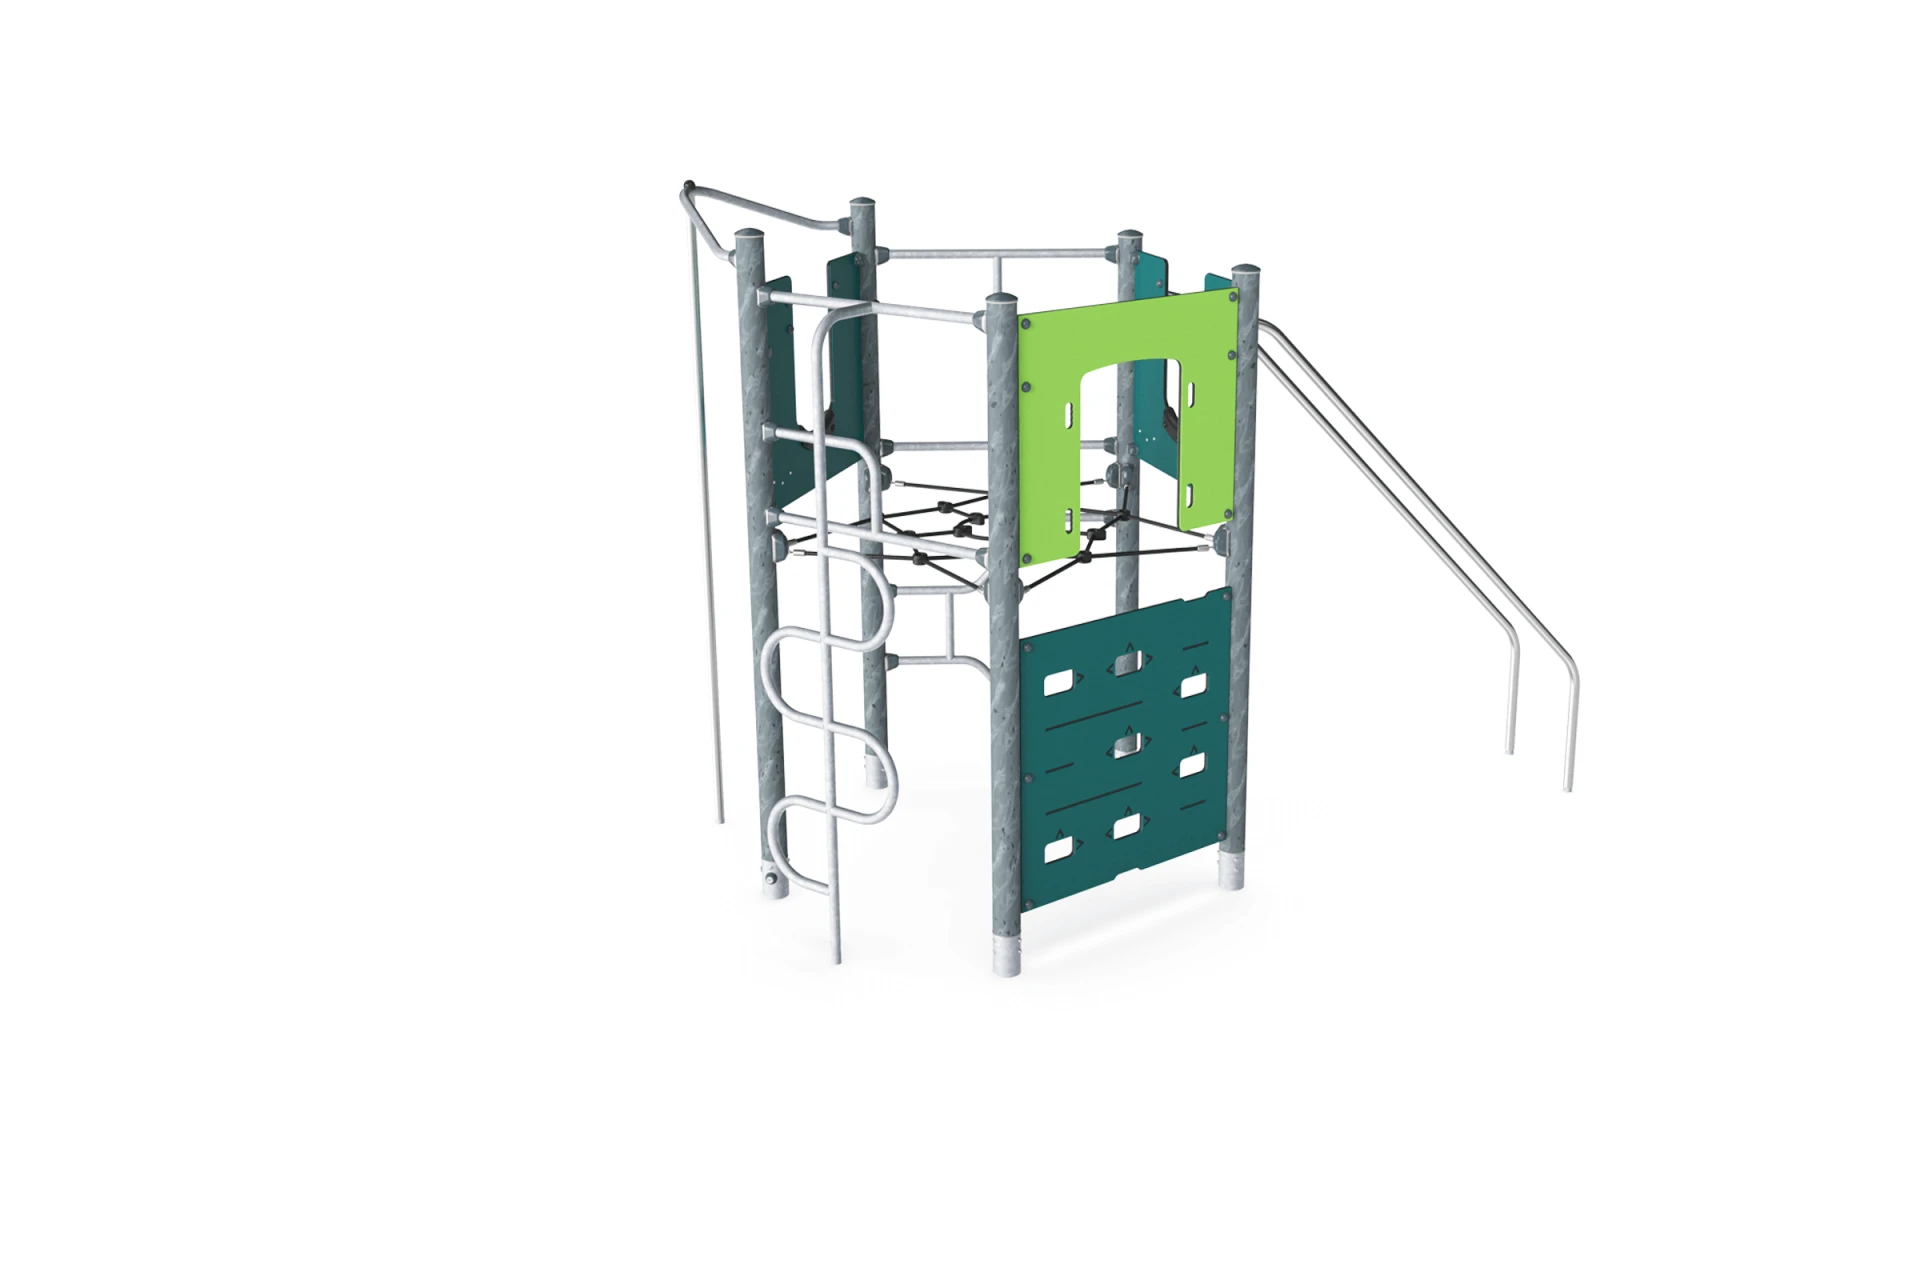 Penta climber product picture